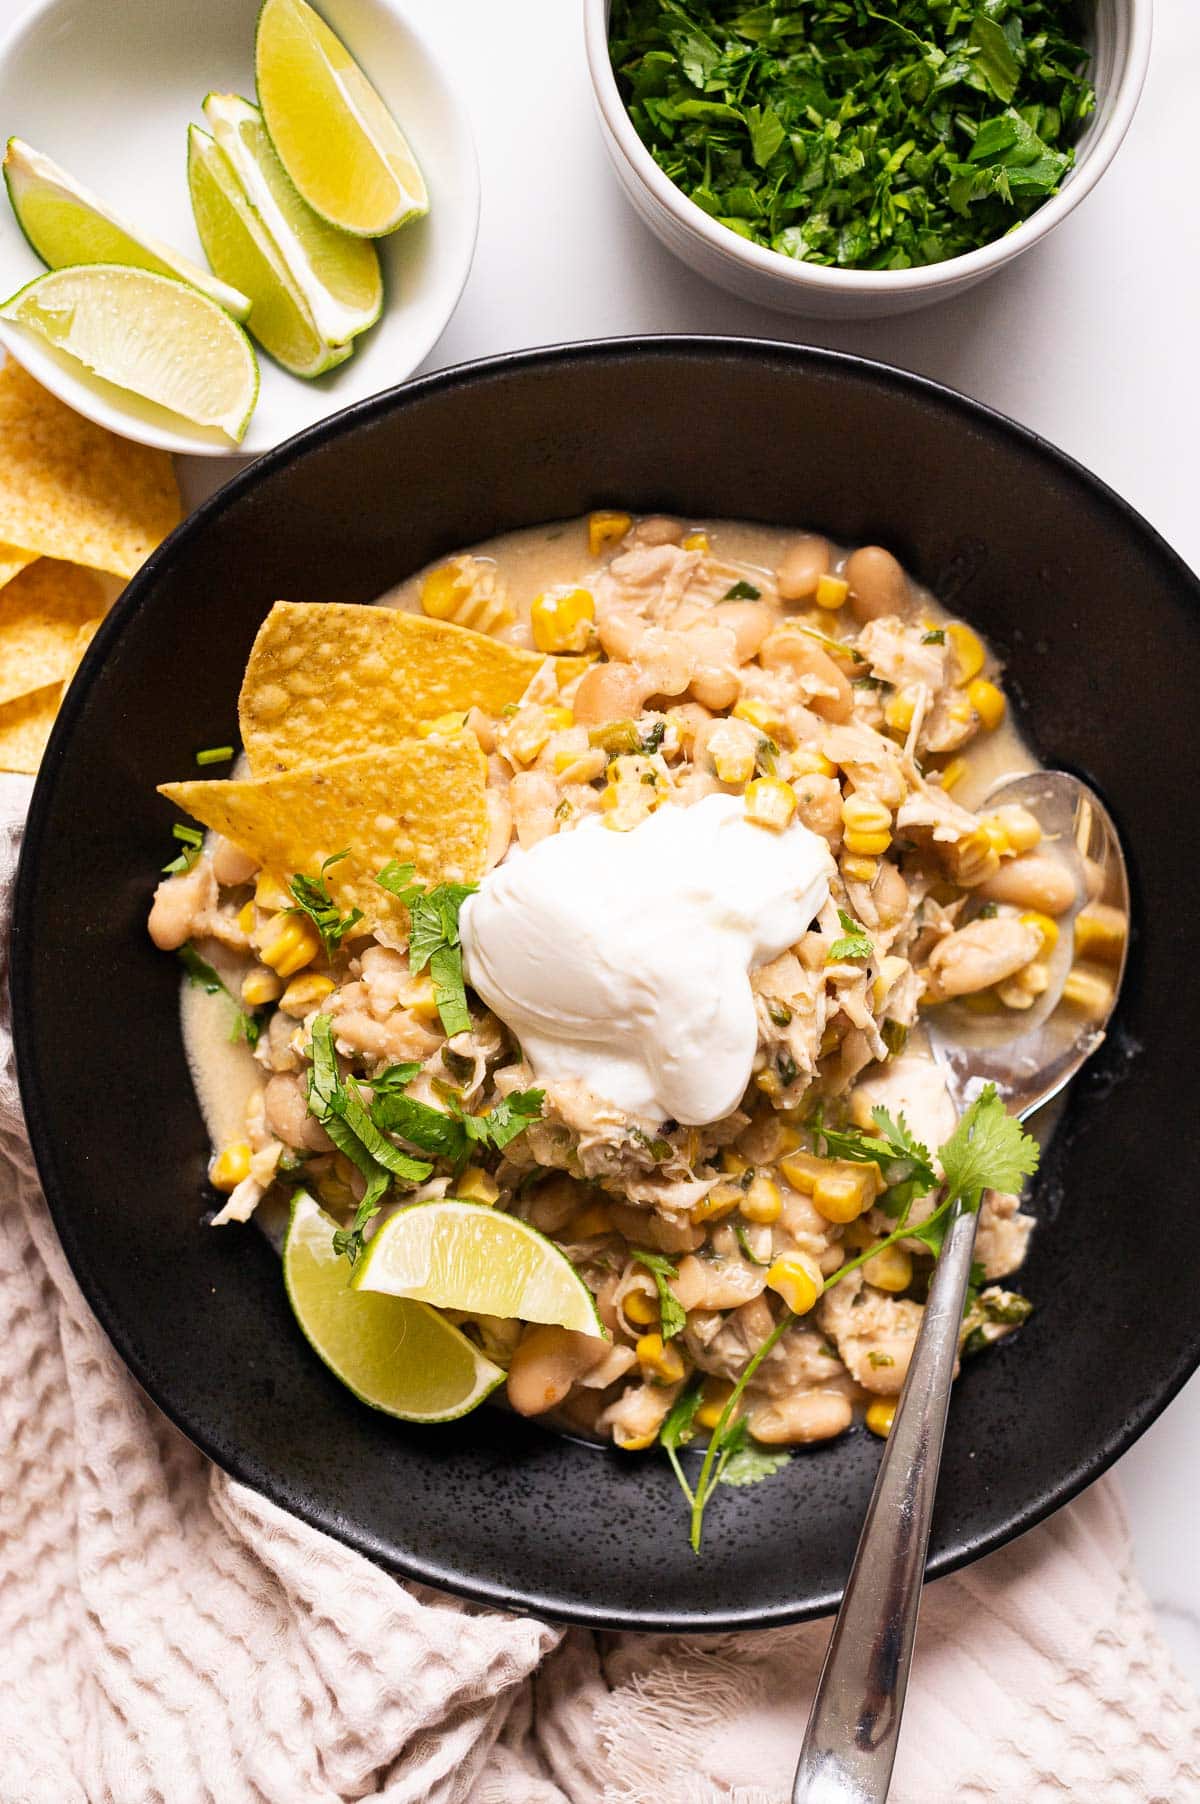 Crockpot white chicken chili served with yogurt, lime, cilantro and tortilla chips in black bowl with a spoon.